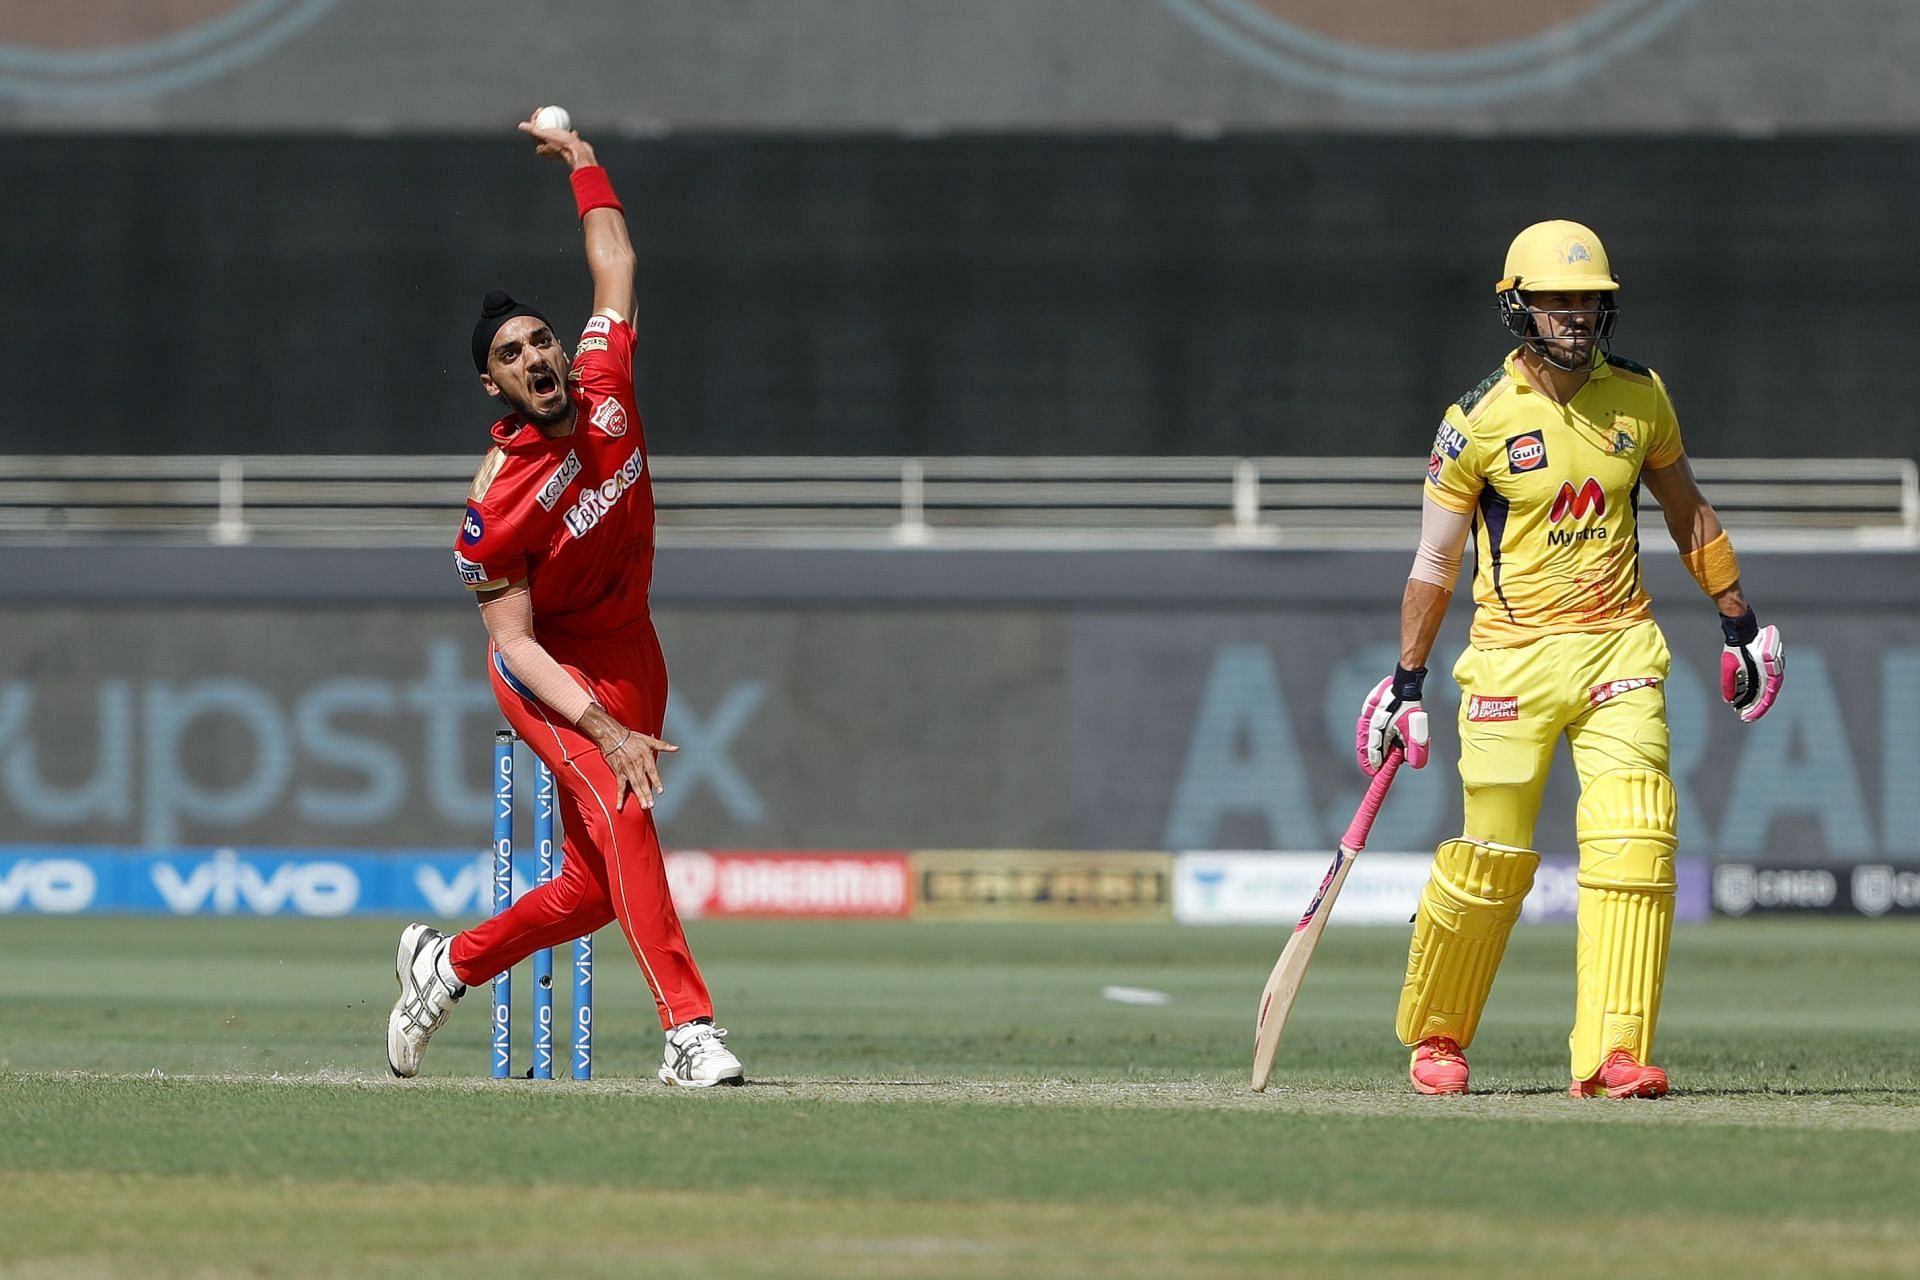 Arshdeep Singh  (left)could be a key uncapped player in IPL Fantasy teams this season. (Image Courtesy: IPLT20.com)